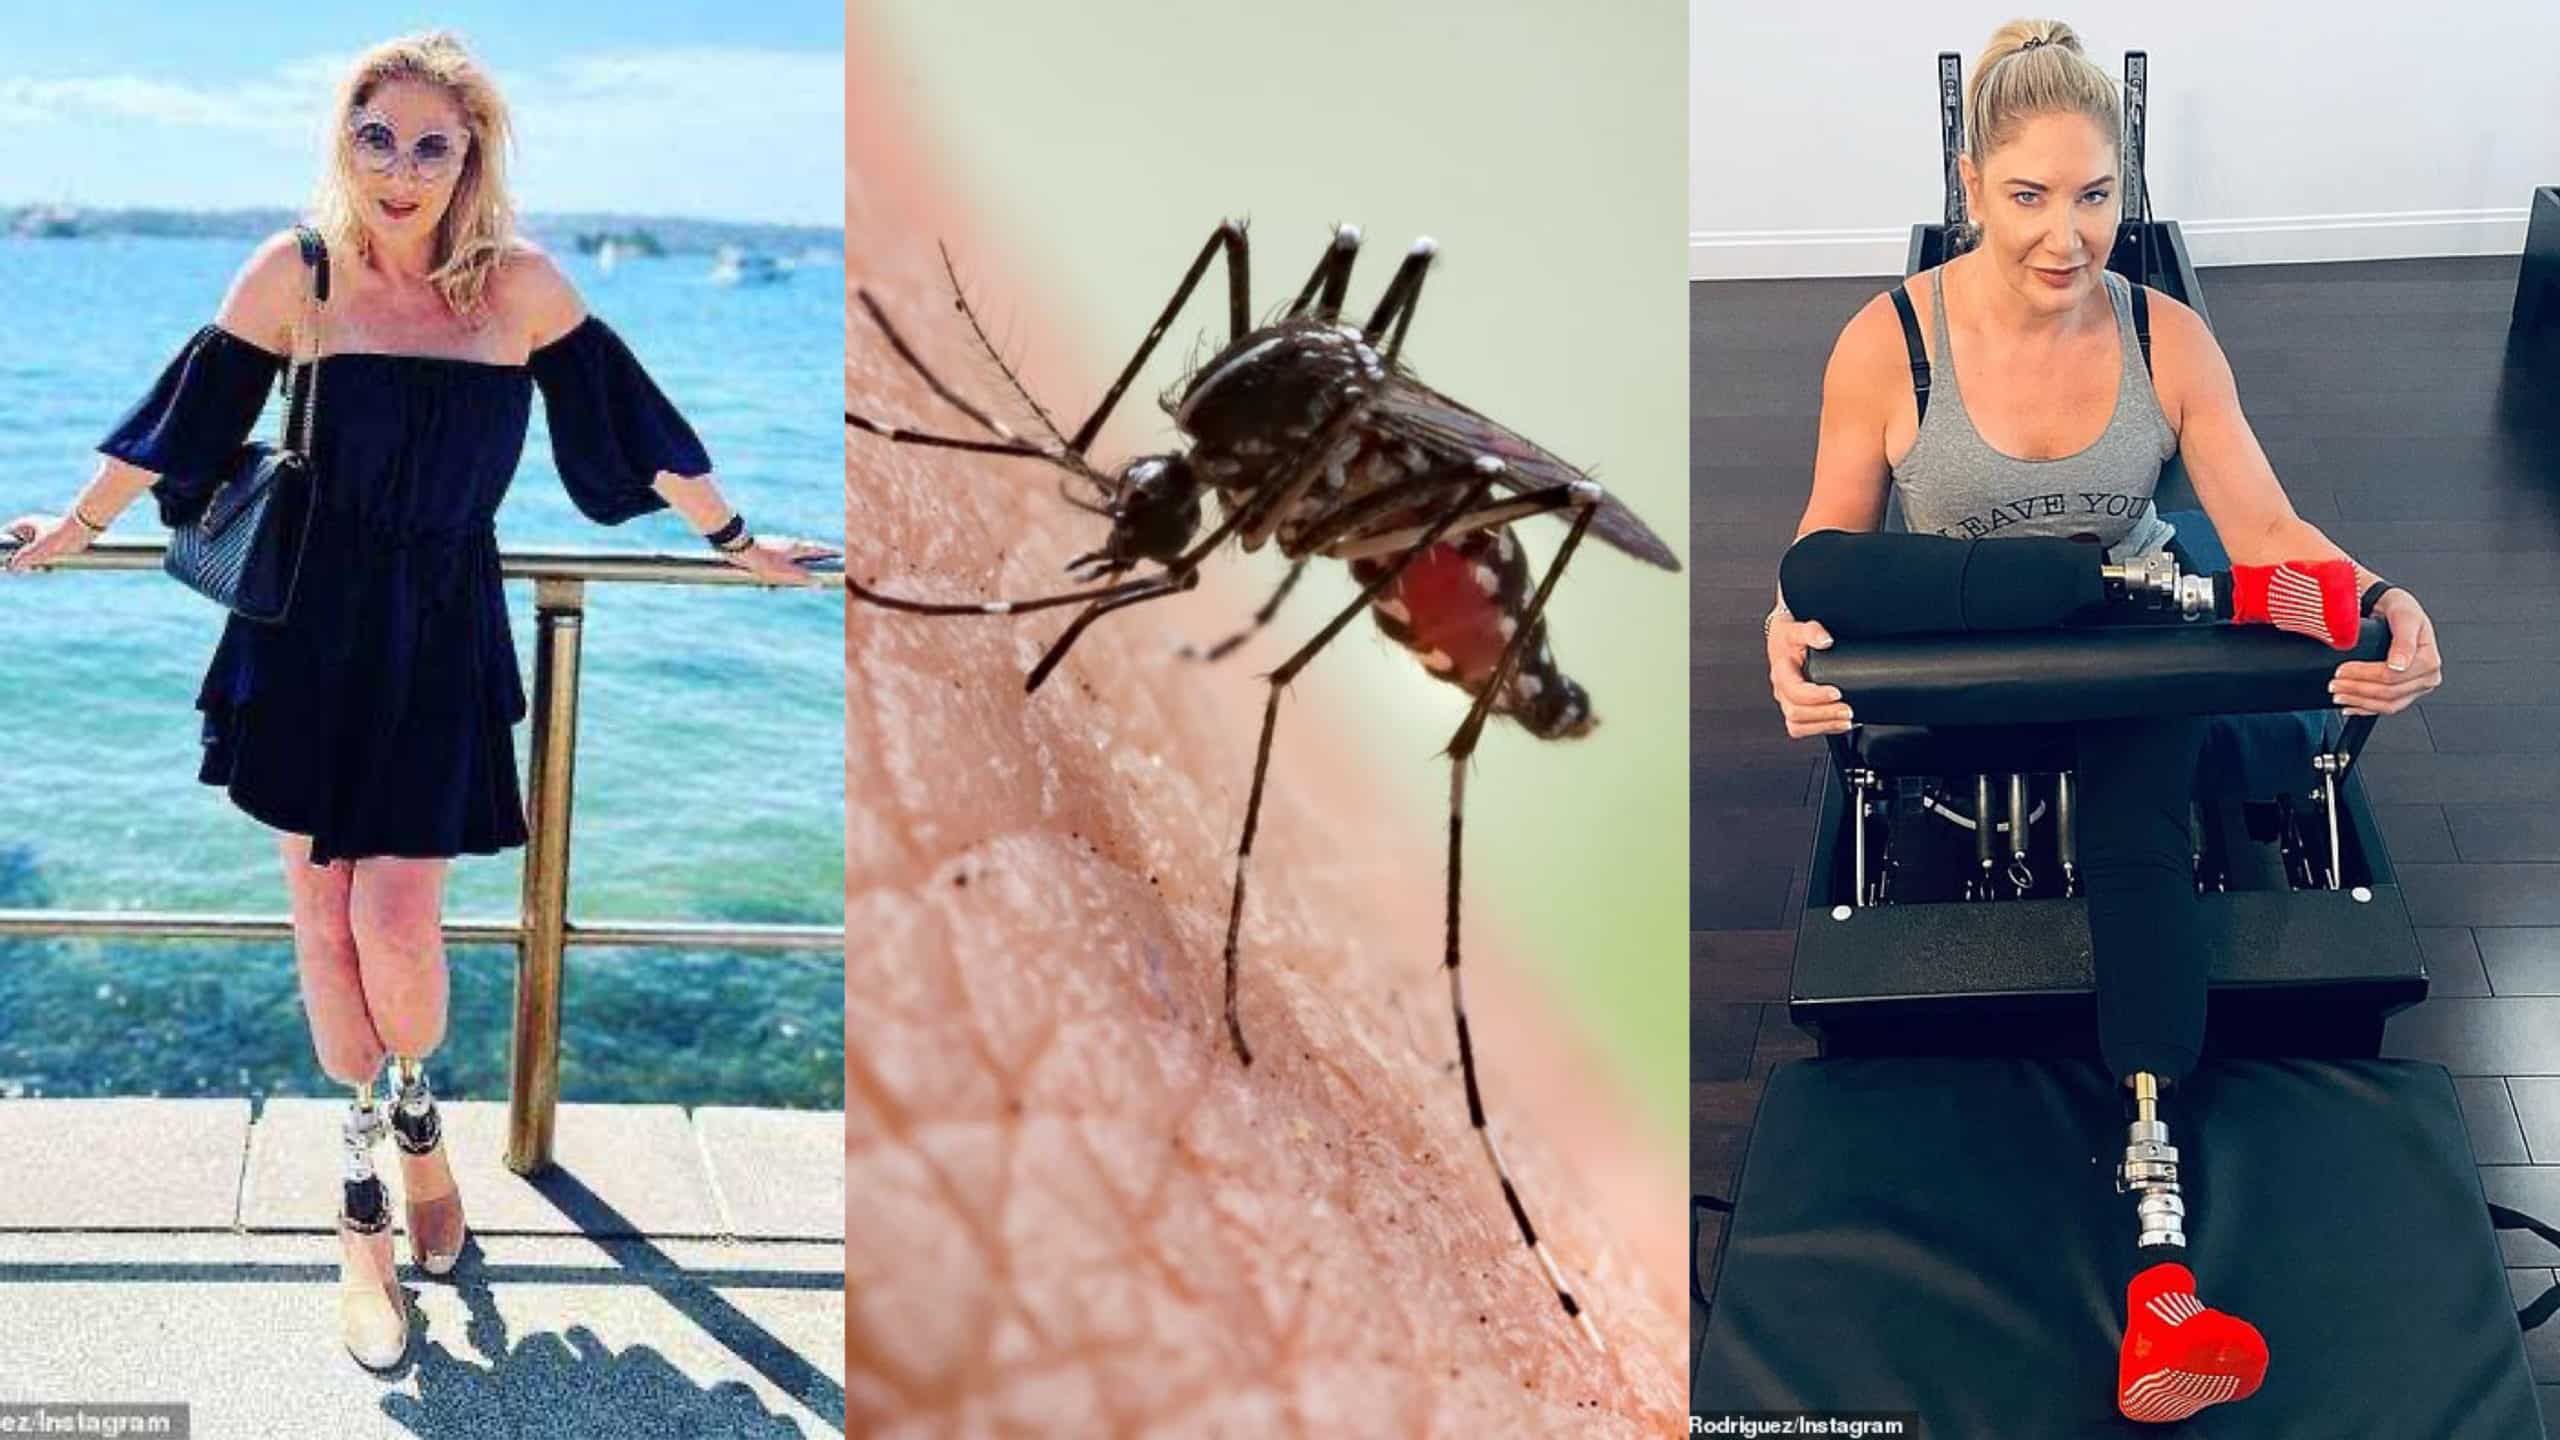 Australian socialite gets her feet amputated after a mosquito bite on her ankle in Nigeria 